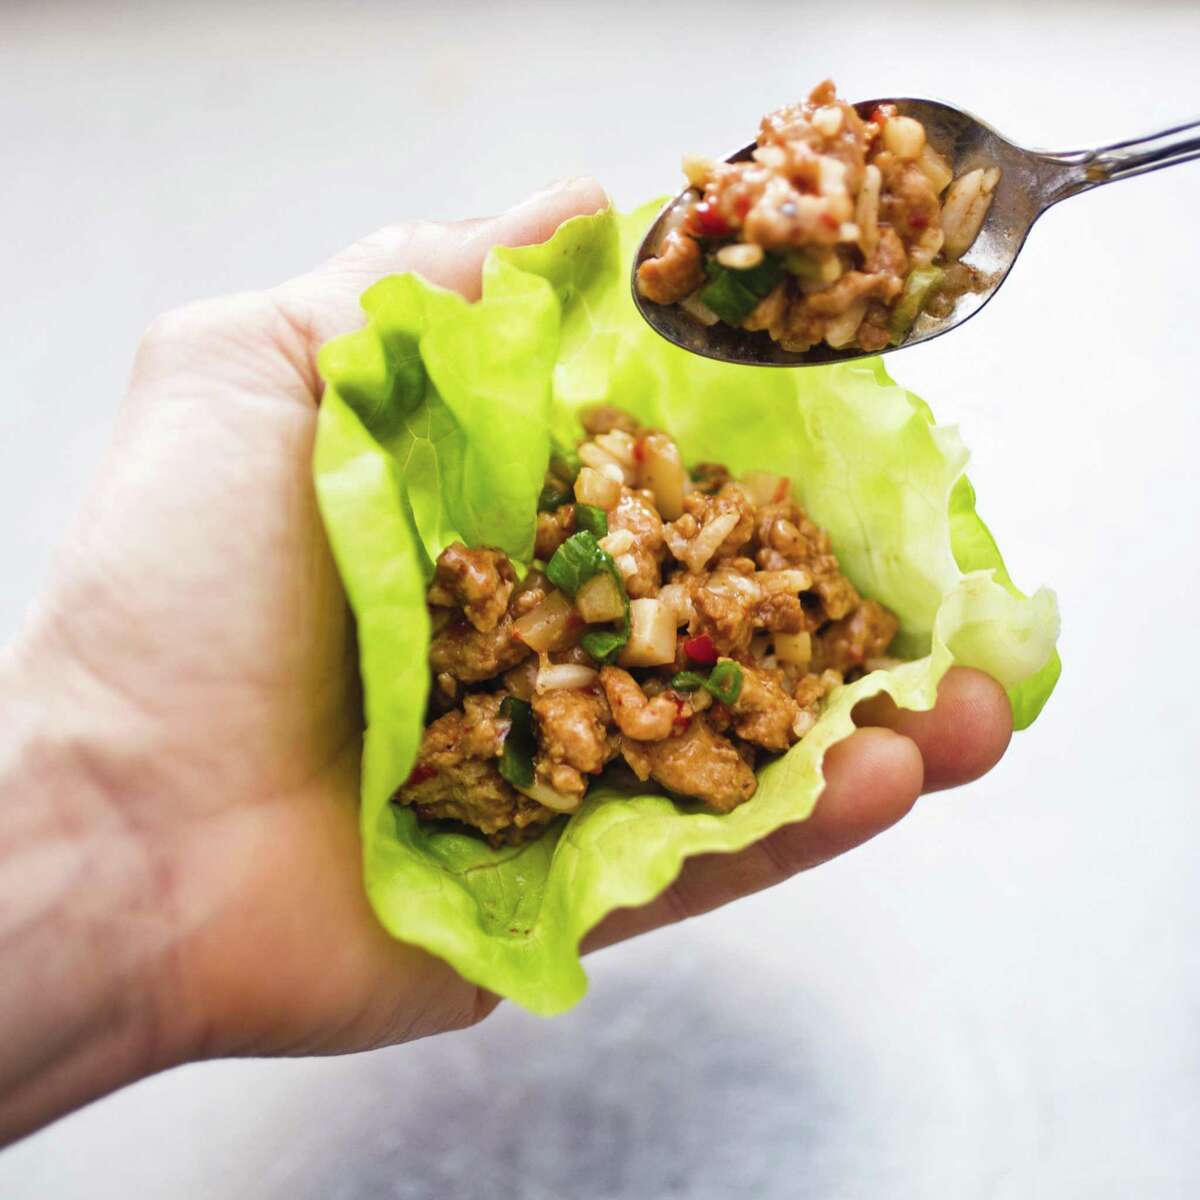 Asian Chicken Lettuce Wraps have a light but flavor-packed filling.